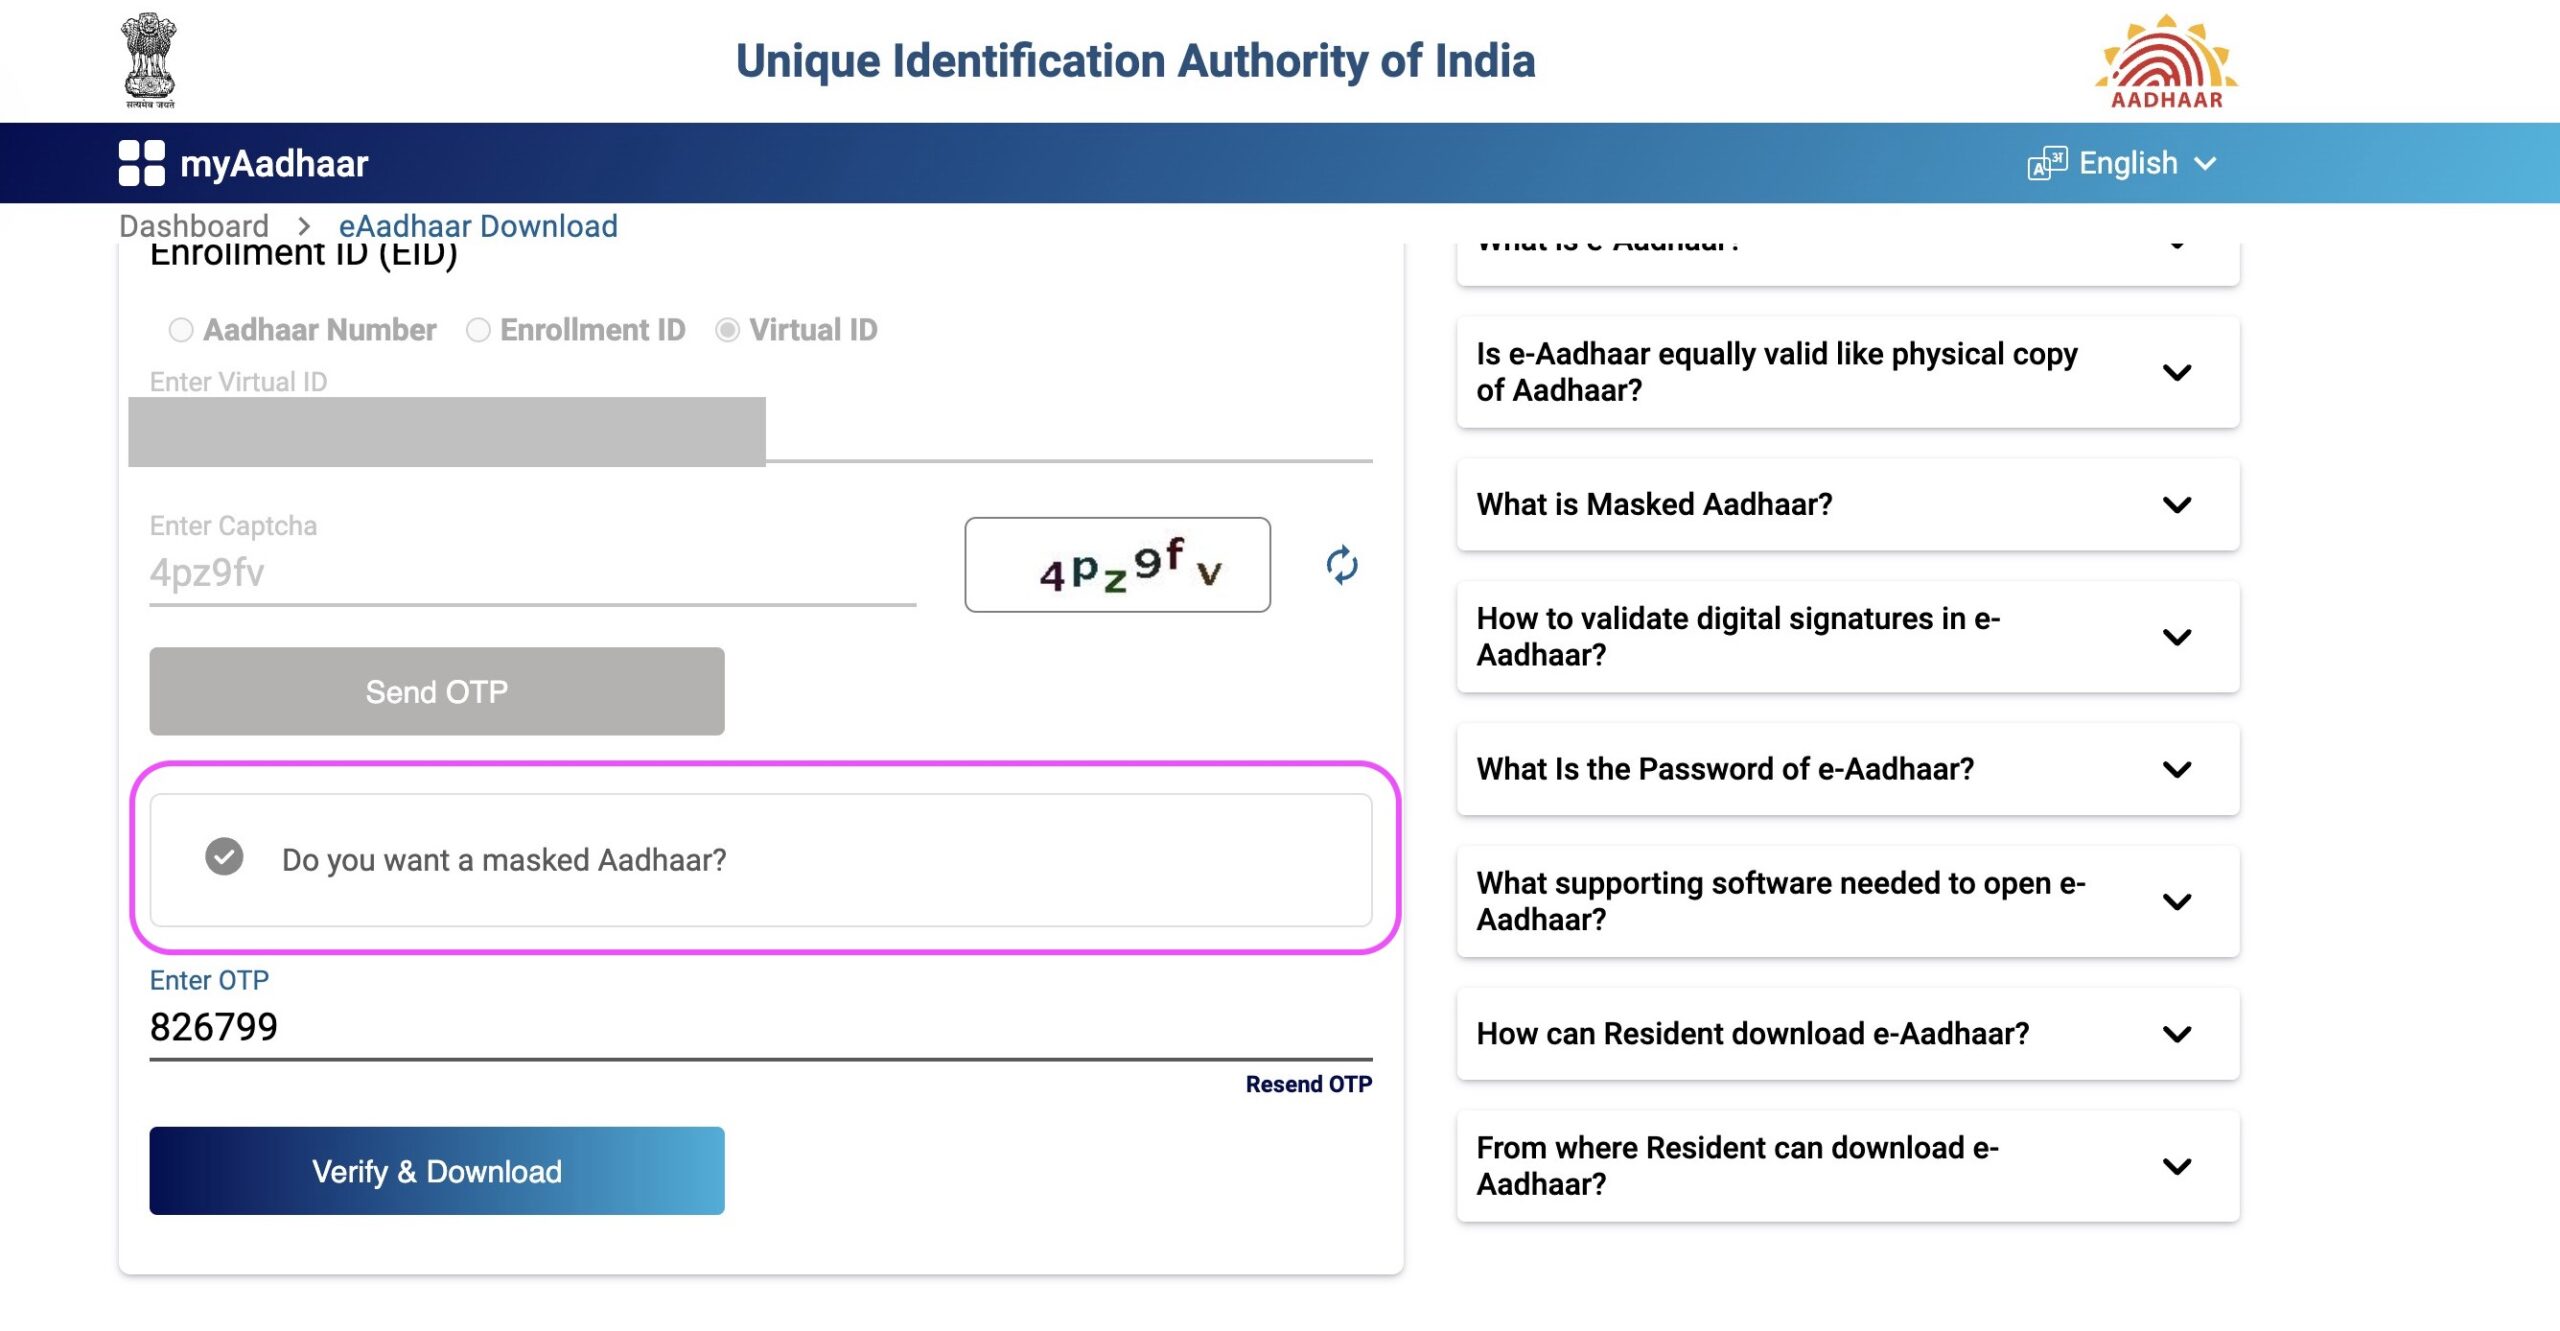 To select the option "Do you want a masked Aadhaar?" to download Masked Aadhaar